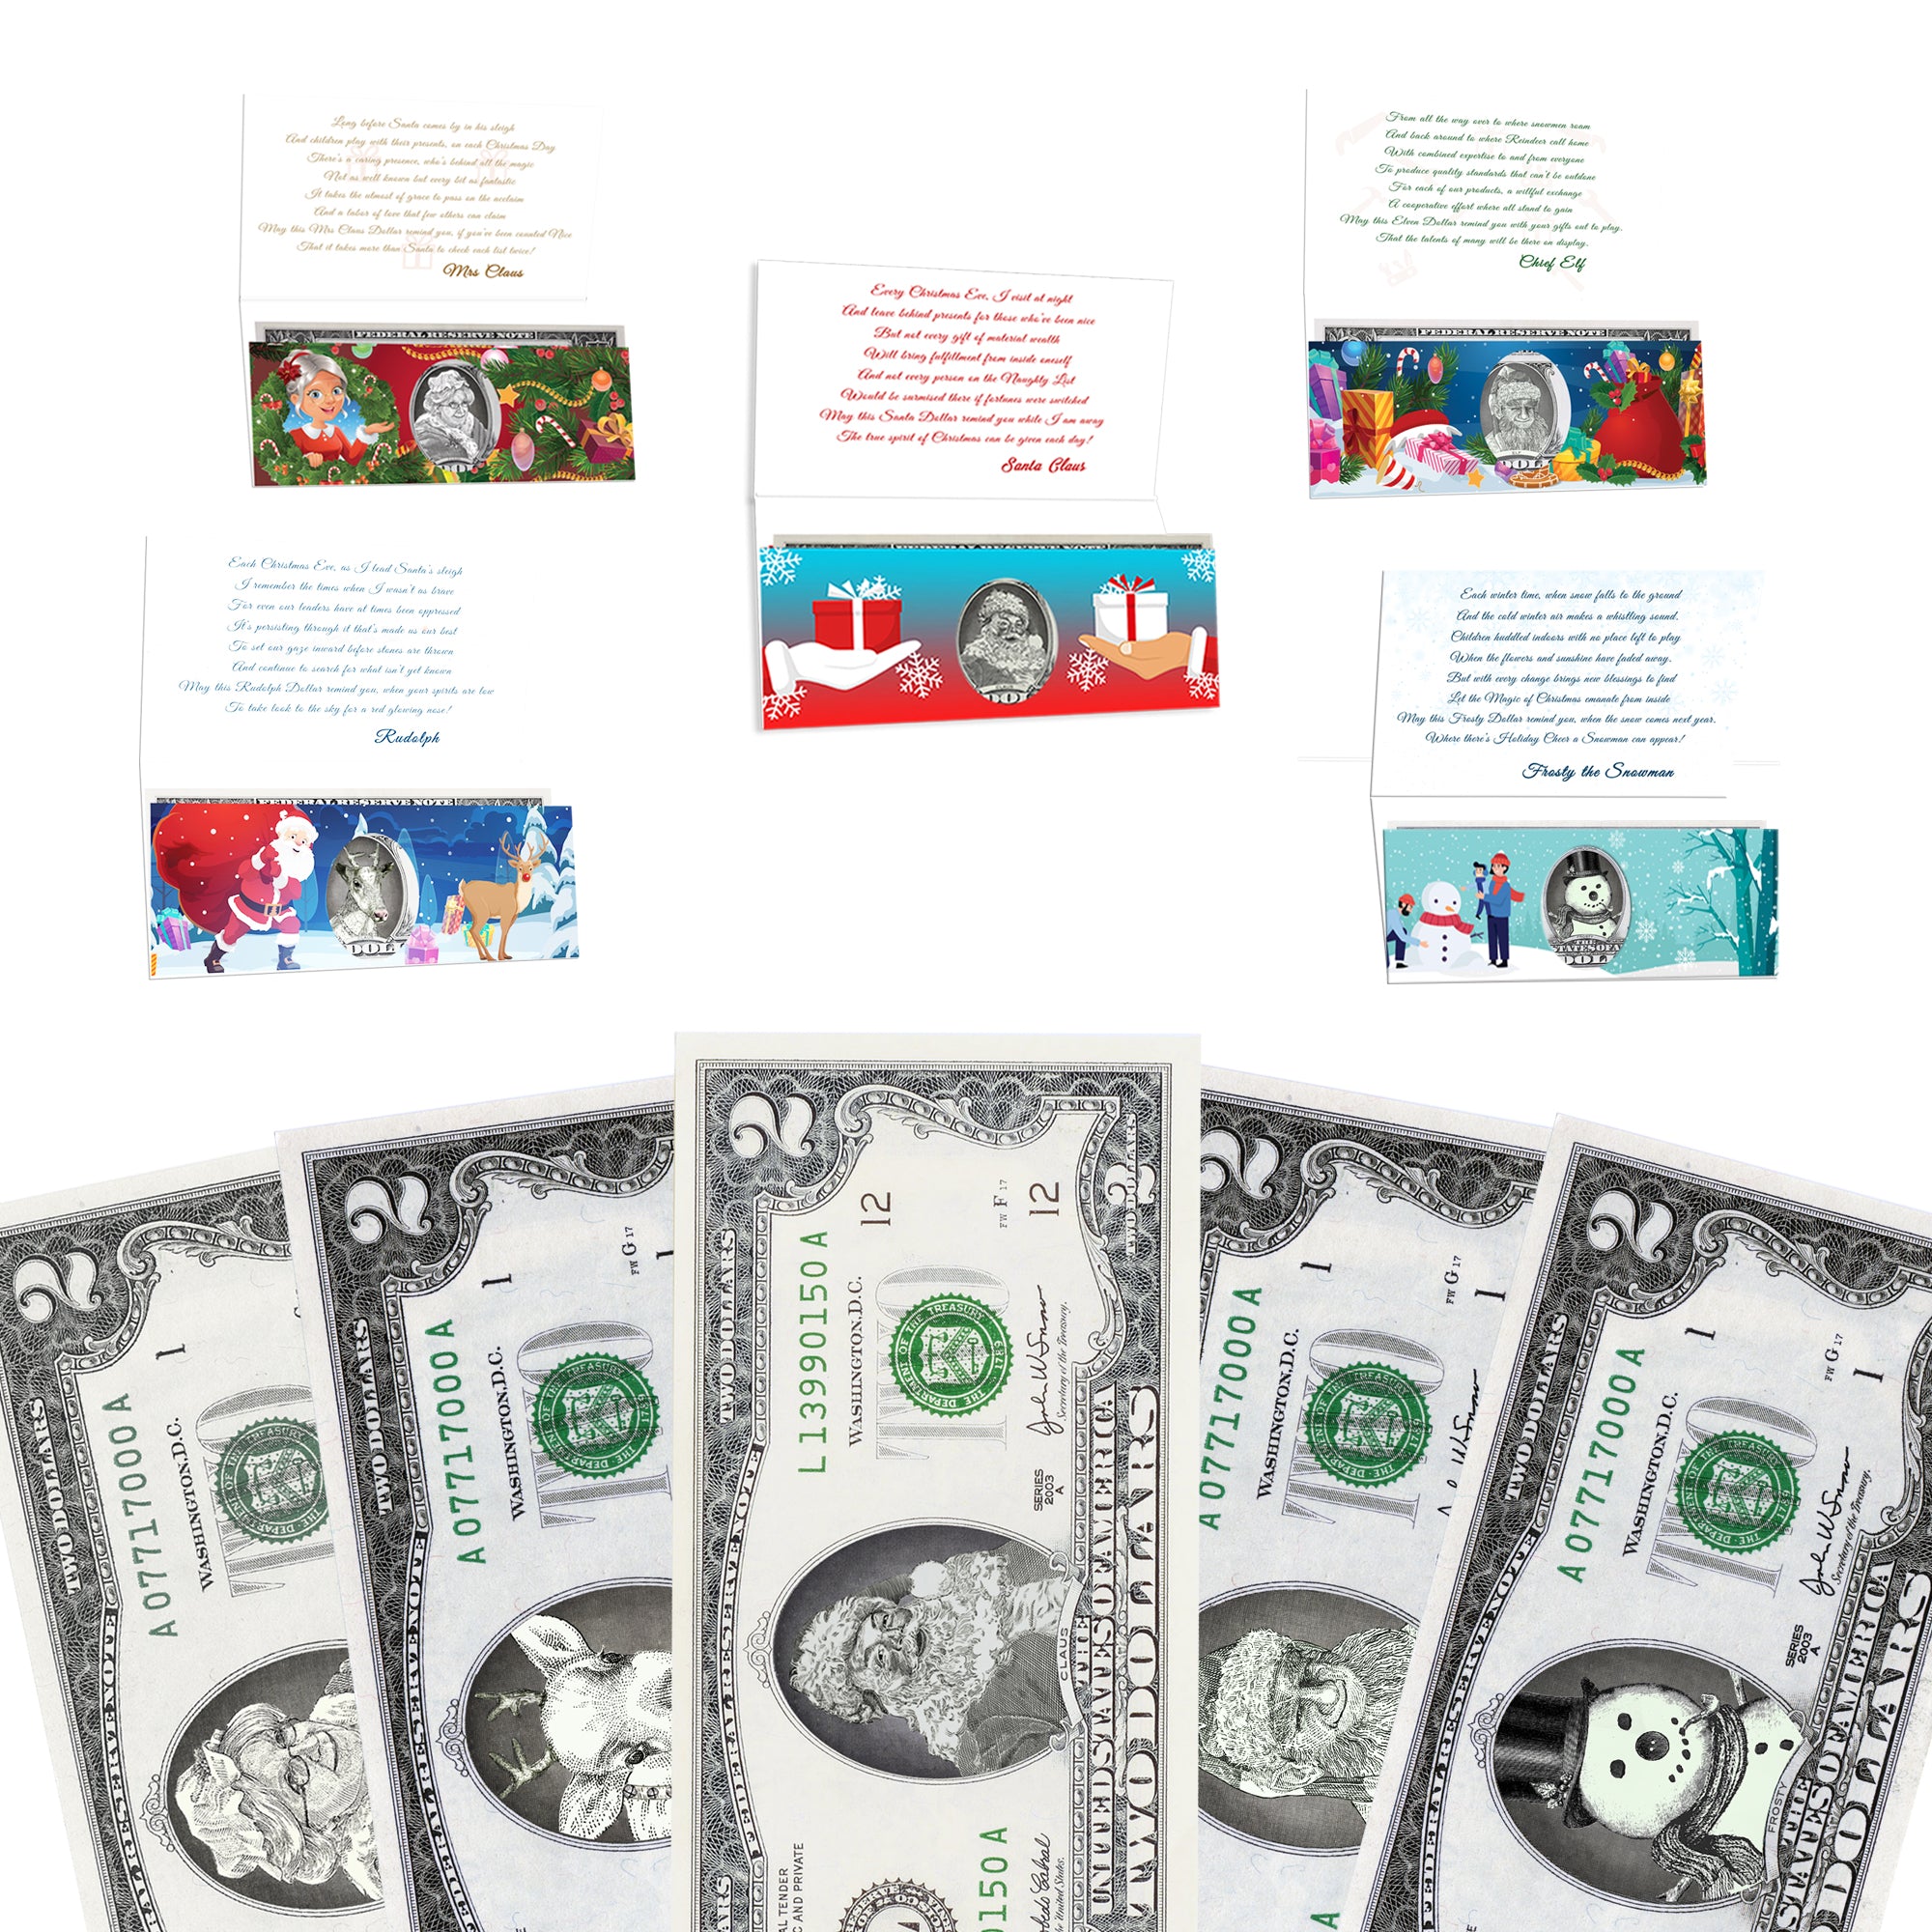 The Official Santa Claus 50.0 USD Dollar Bill. Real USD. Bankable and  Spendable. Complete Santa Gift and Card